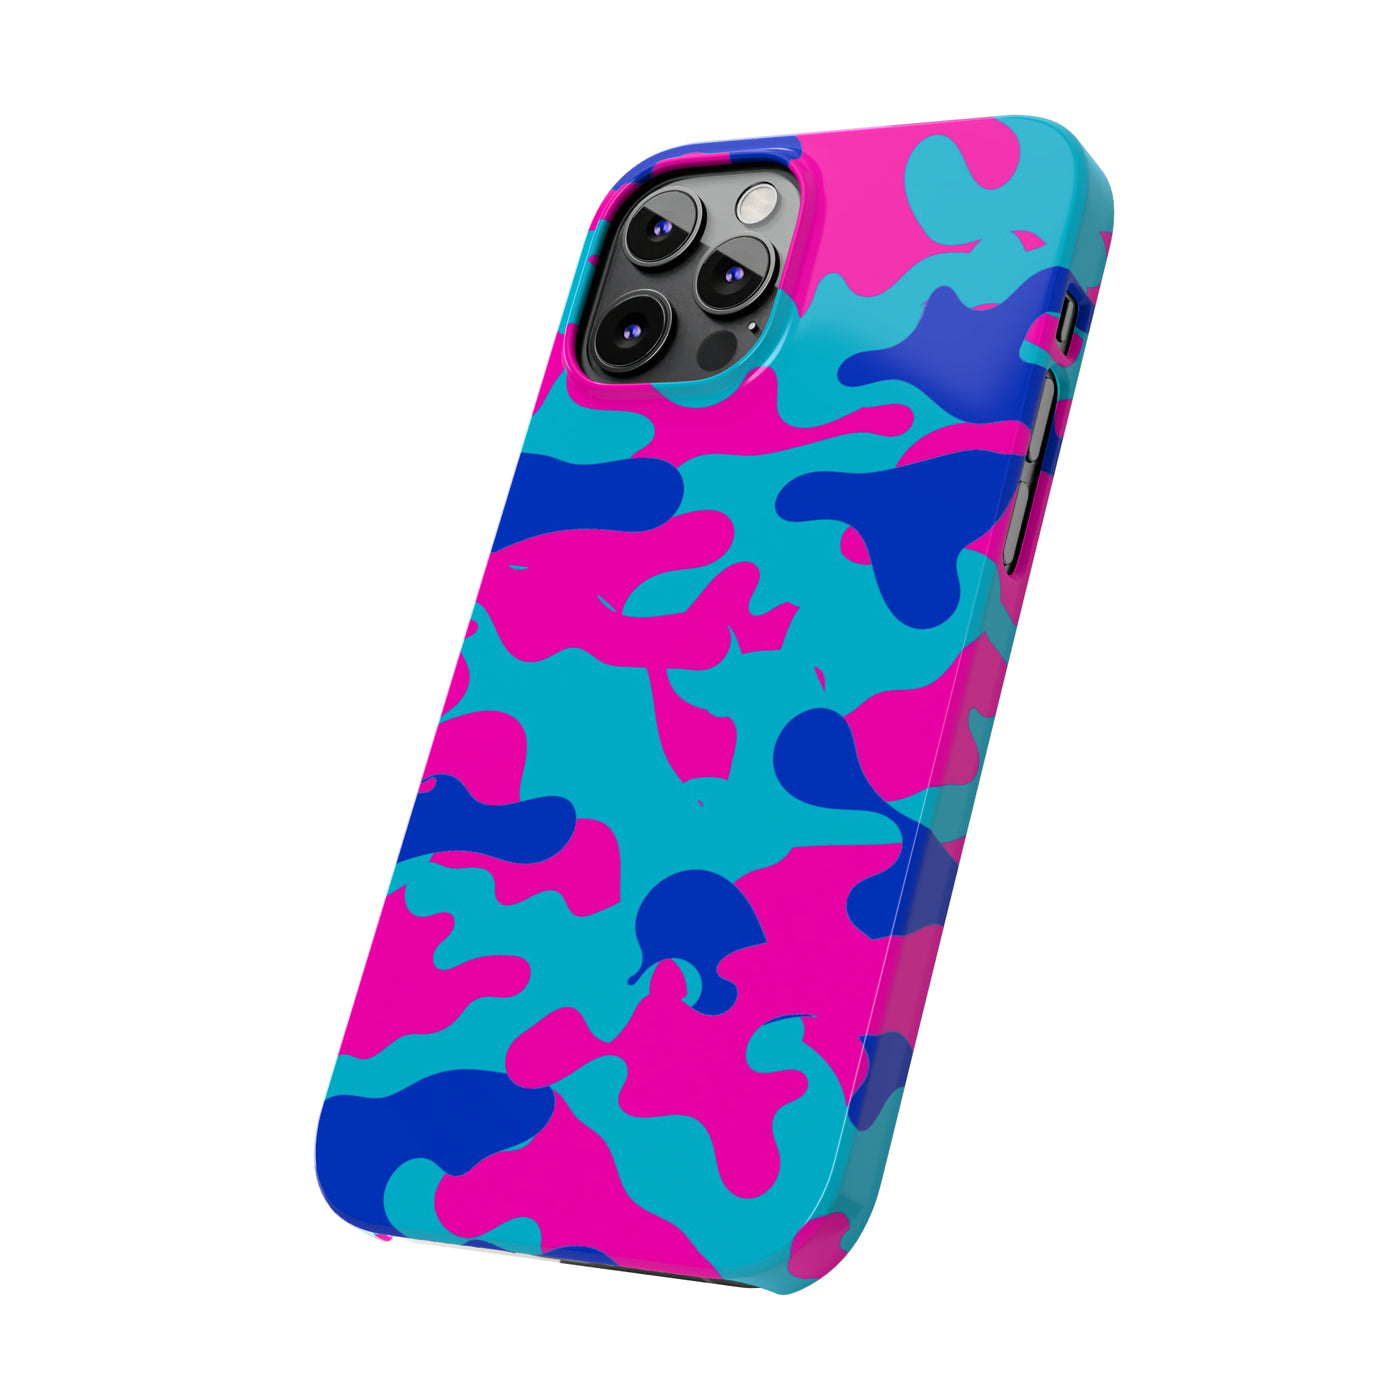 Slim Cute iPhone Cases - | iPhone 15 Case | iPhone 15 Pro Max Case, Iphone 14 Case, Iphone 14 Pro Max, Iphone 13, Blue Pink Camouflage